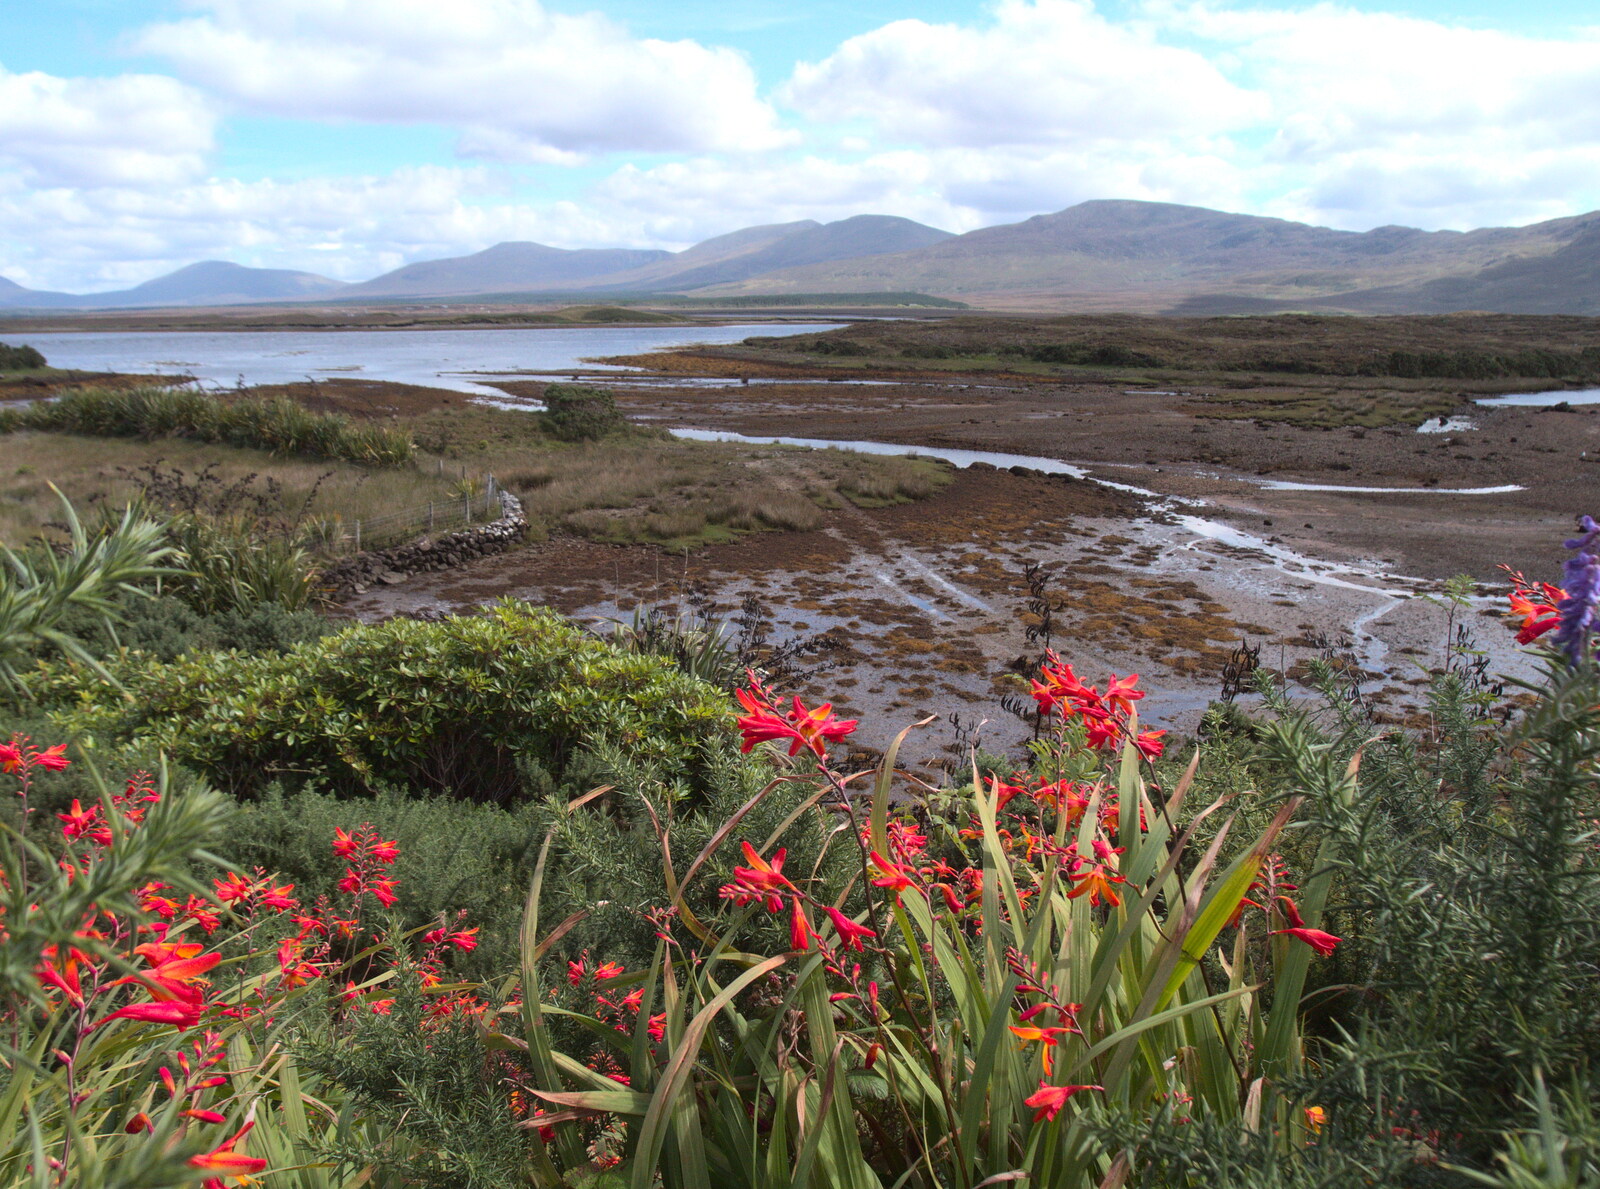 A gorgeous view towards the mountains from A Bike Ride to Mulranny, County Mayo, Ireland - 9th August 2017